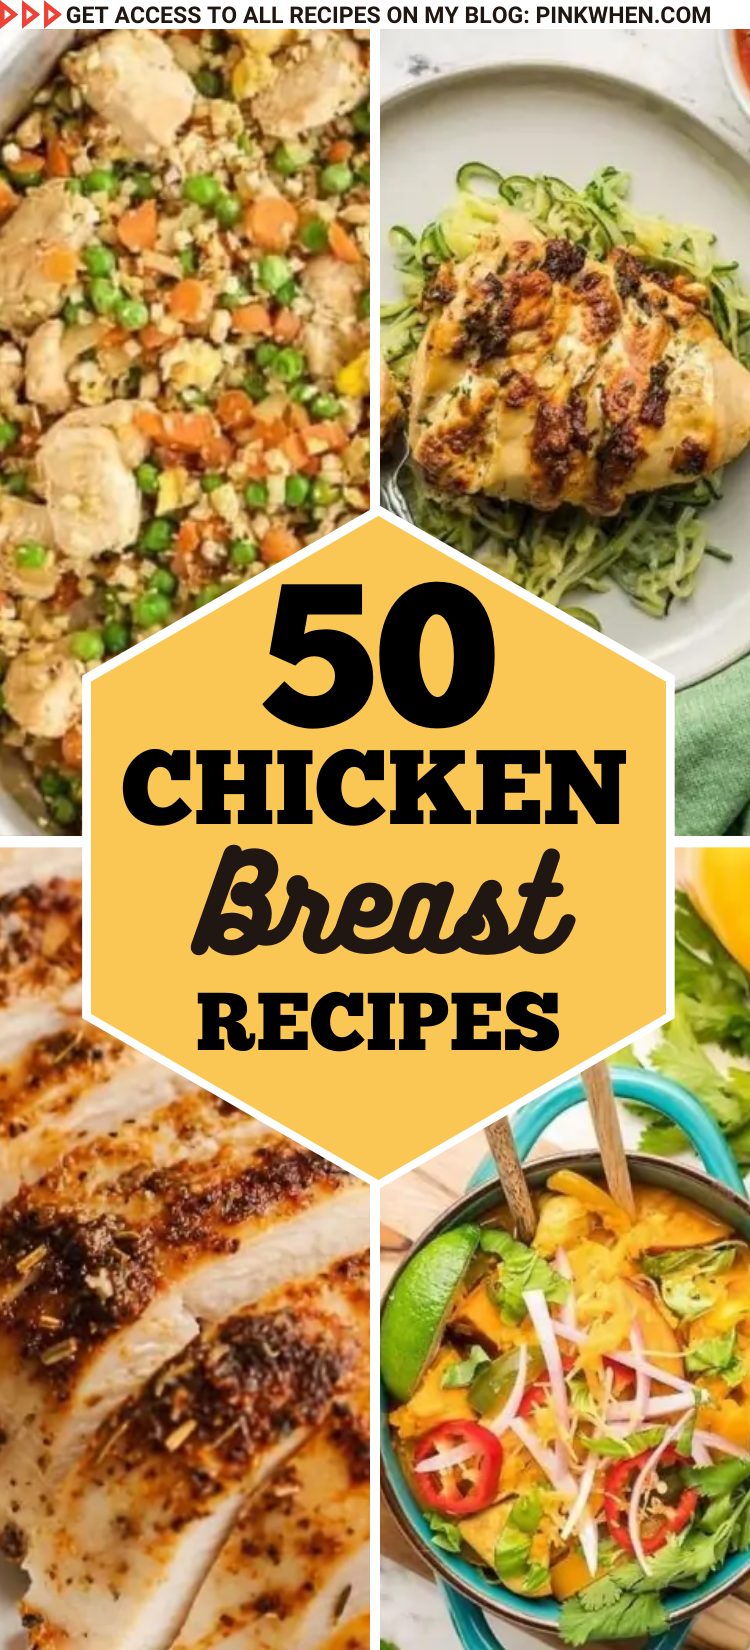 50 Chicken Breast Recipes Your Family Will Love